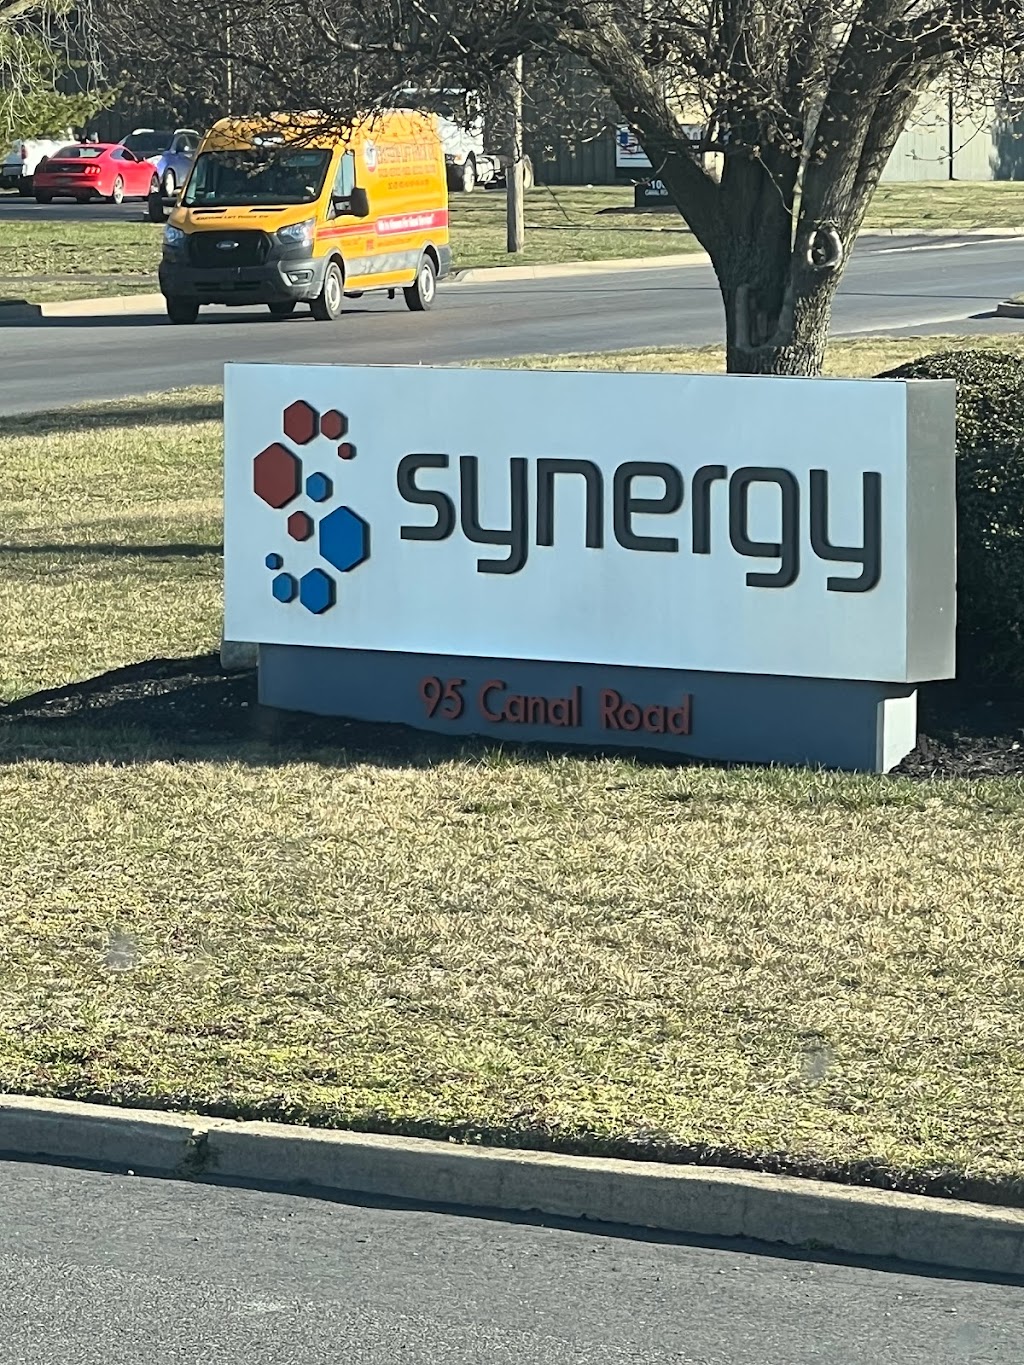 Synergy Electrical Sales Inc | 95 Canal Rd, Fairless Hills, PA 19030 | Phone: (215) 428-1130